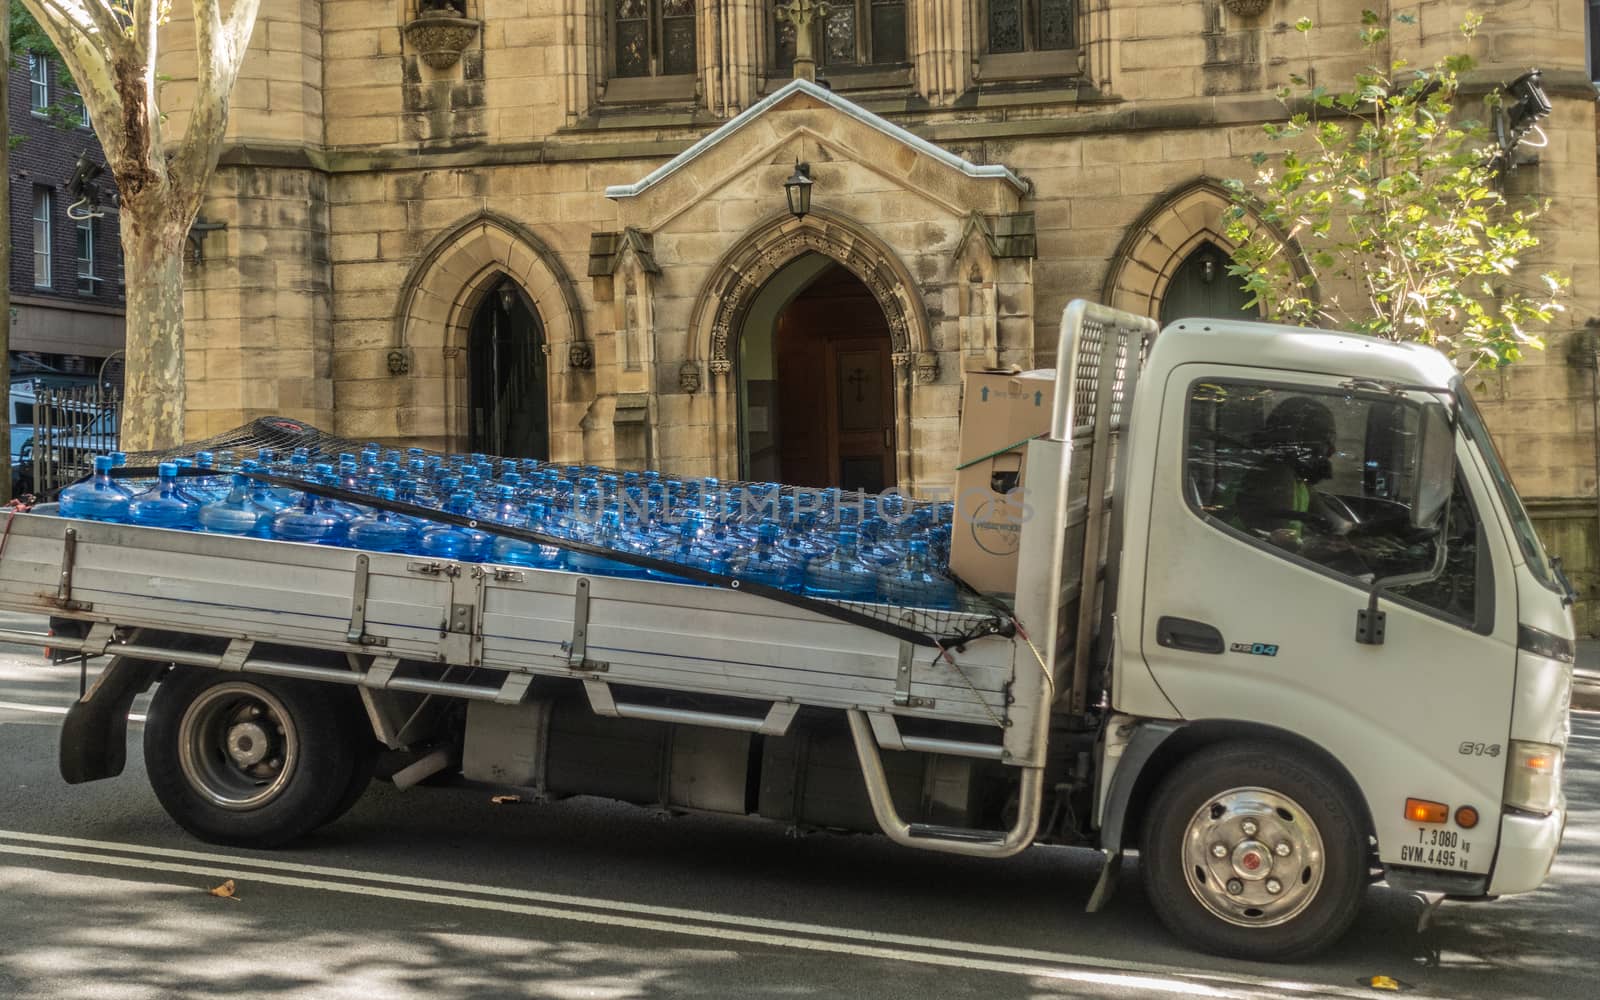 Sydney, Australia - February 12, 2019: White flatbed van transports a full load of blue large drinking water bottles. Back is yellow facade of Saint Patricks Church.